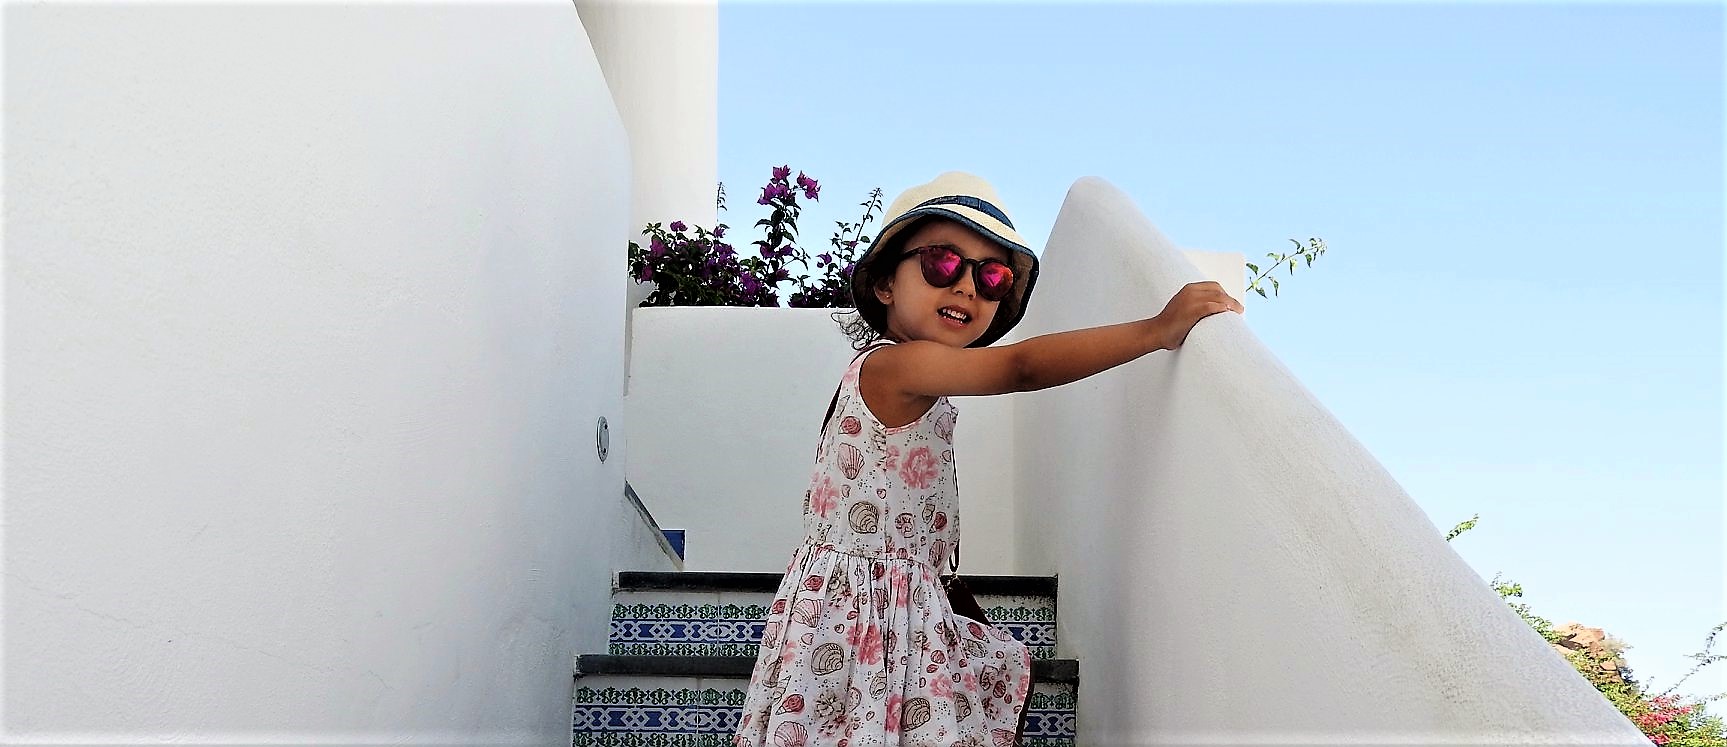 Lara in the Aeolian Island. The world's youngest travel blogger.